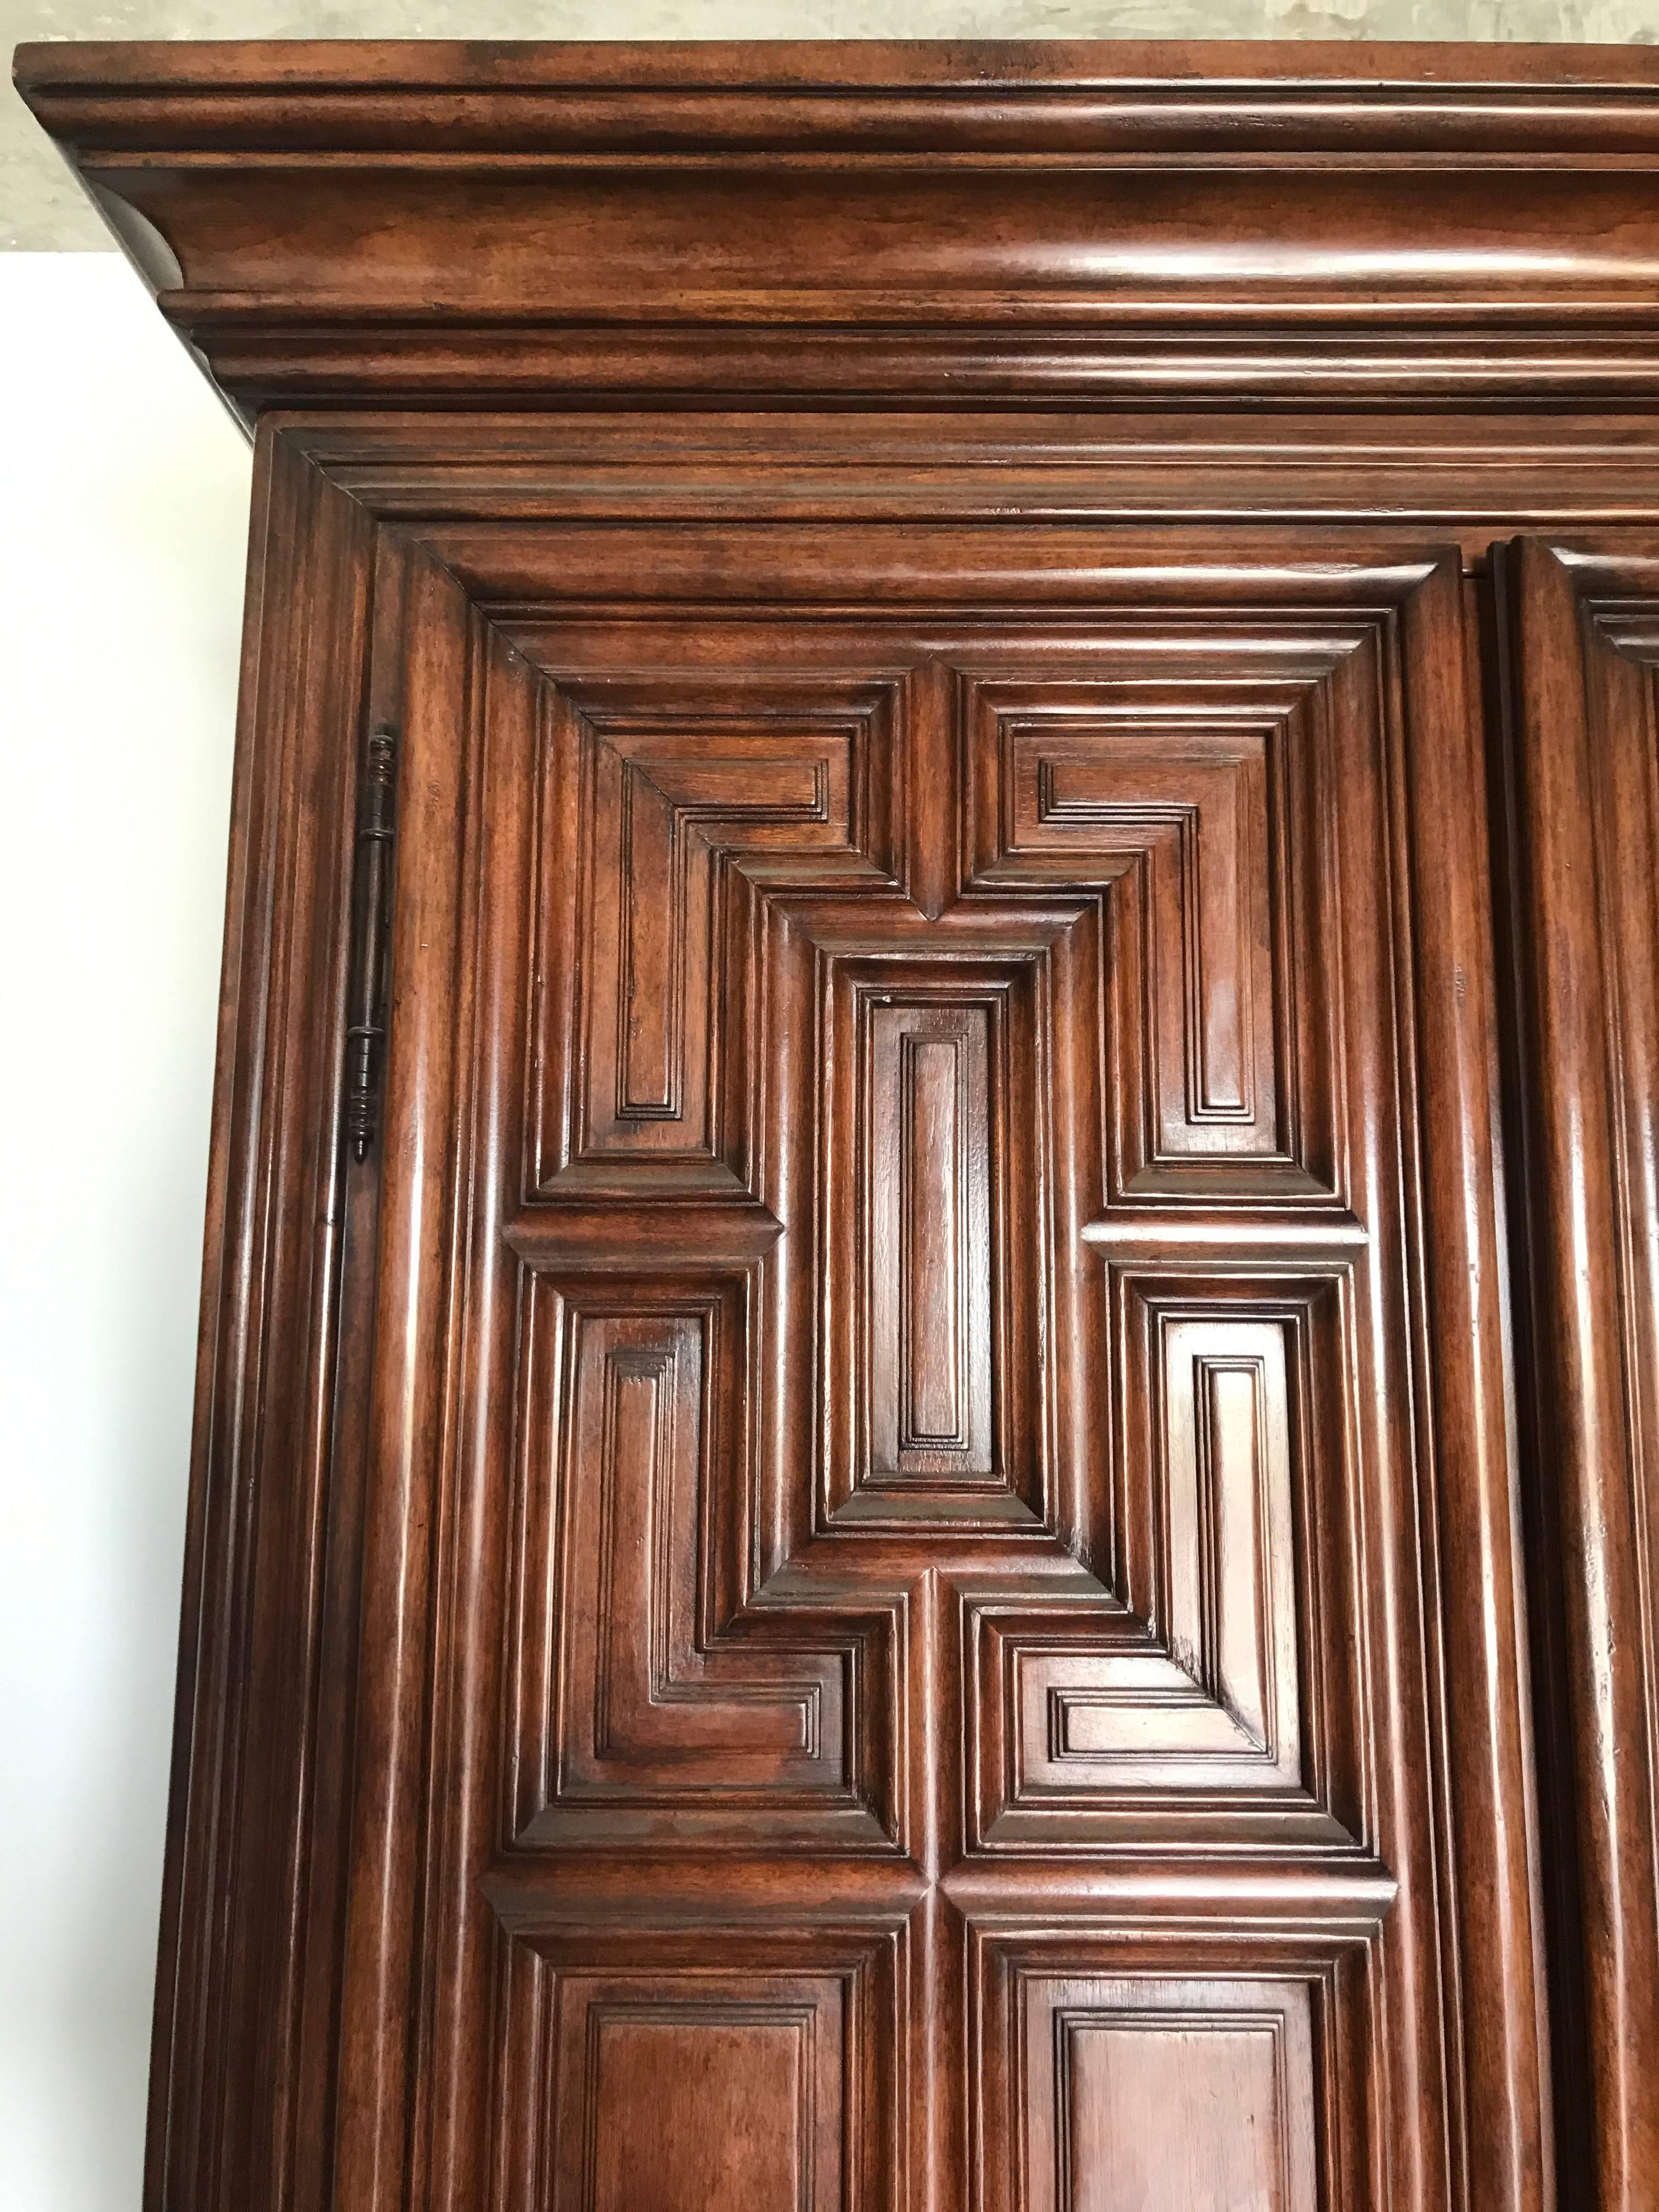 Geometric Armoire Geometric Armoire by Charles Pollock for the William Switzer Collection exquisite floor room sample. Of generous porptions, beautifully carved and finished. This item is not fitted as a TV cabinet, this piece is only fitted with 2